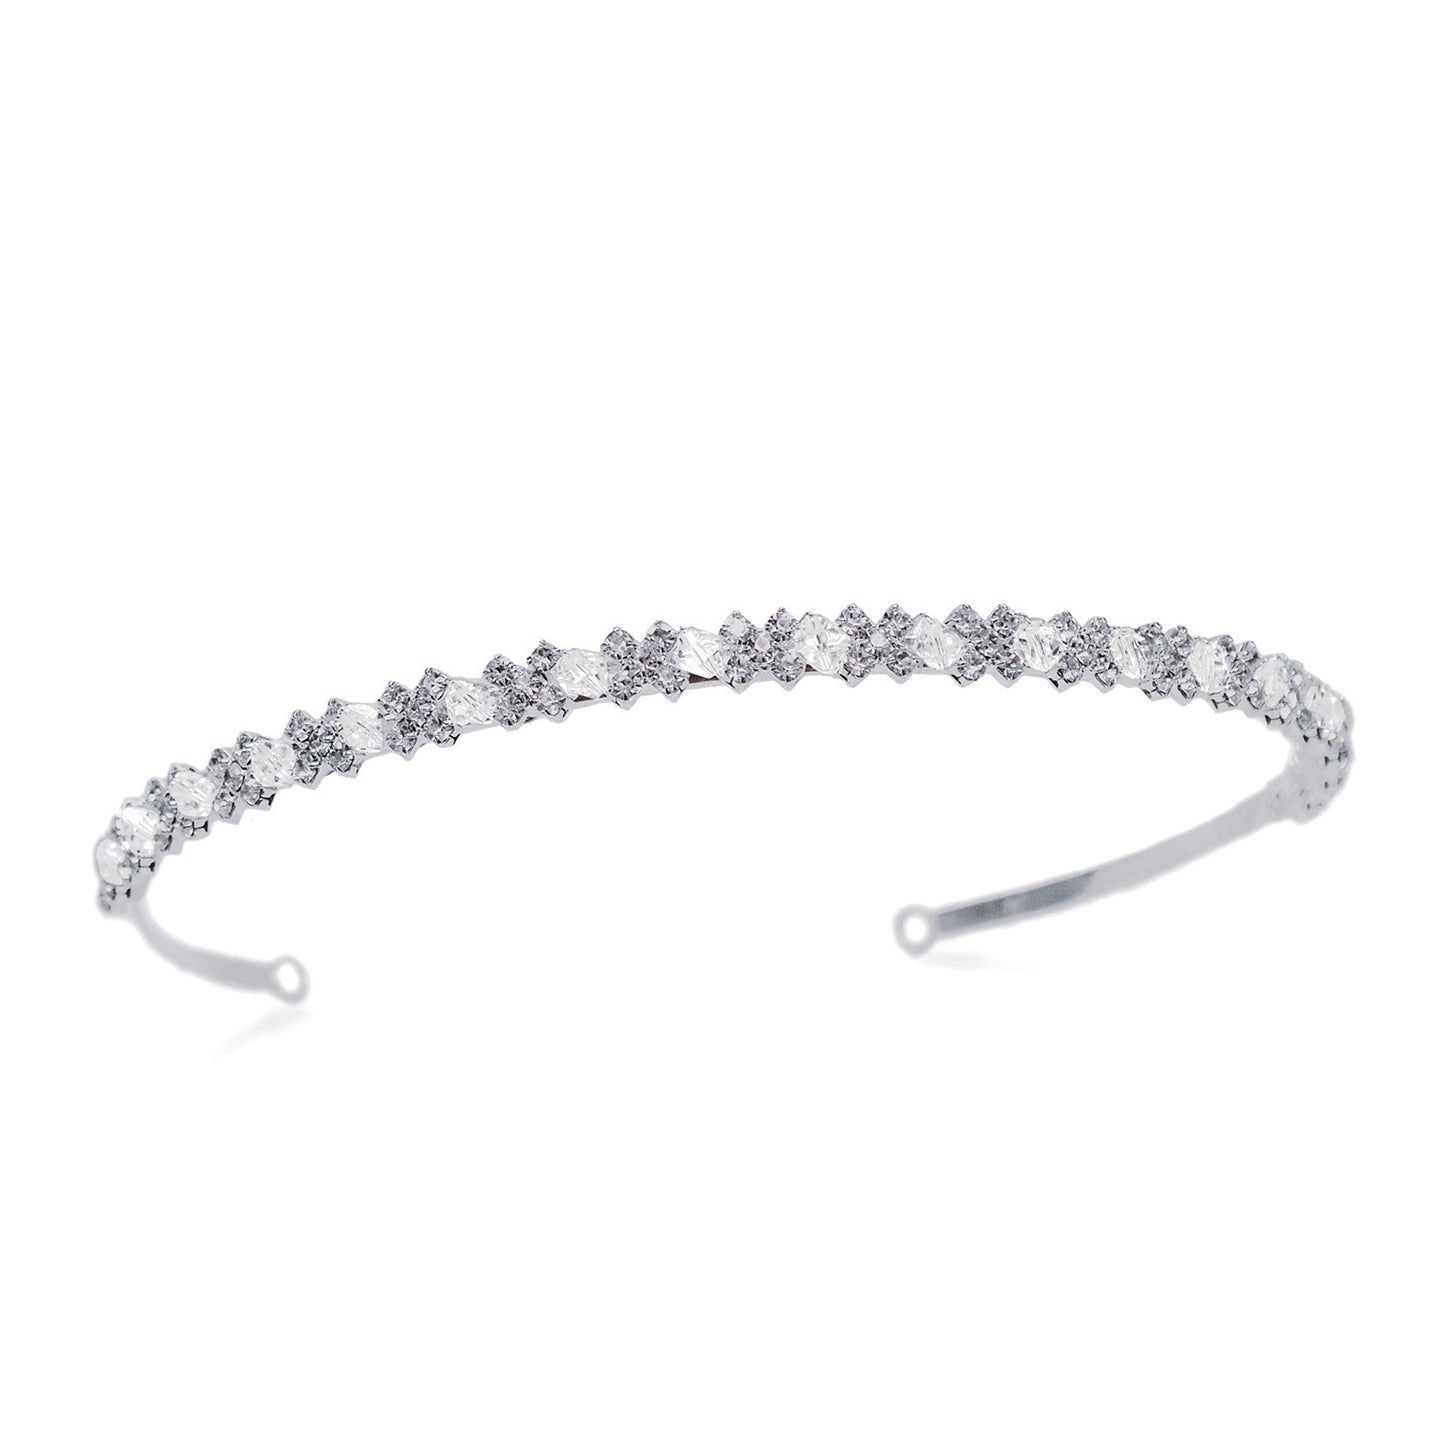 Everly - Silver Dazzling Crystal Cluster Tiara